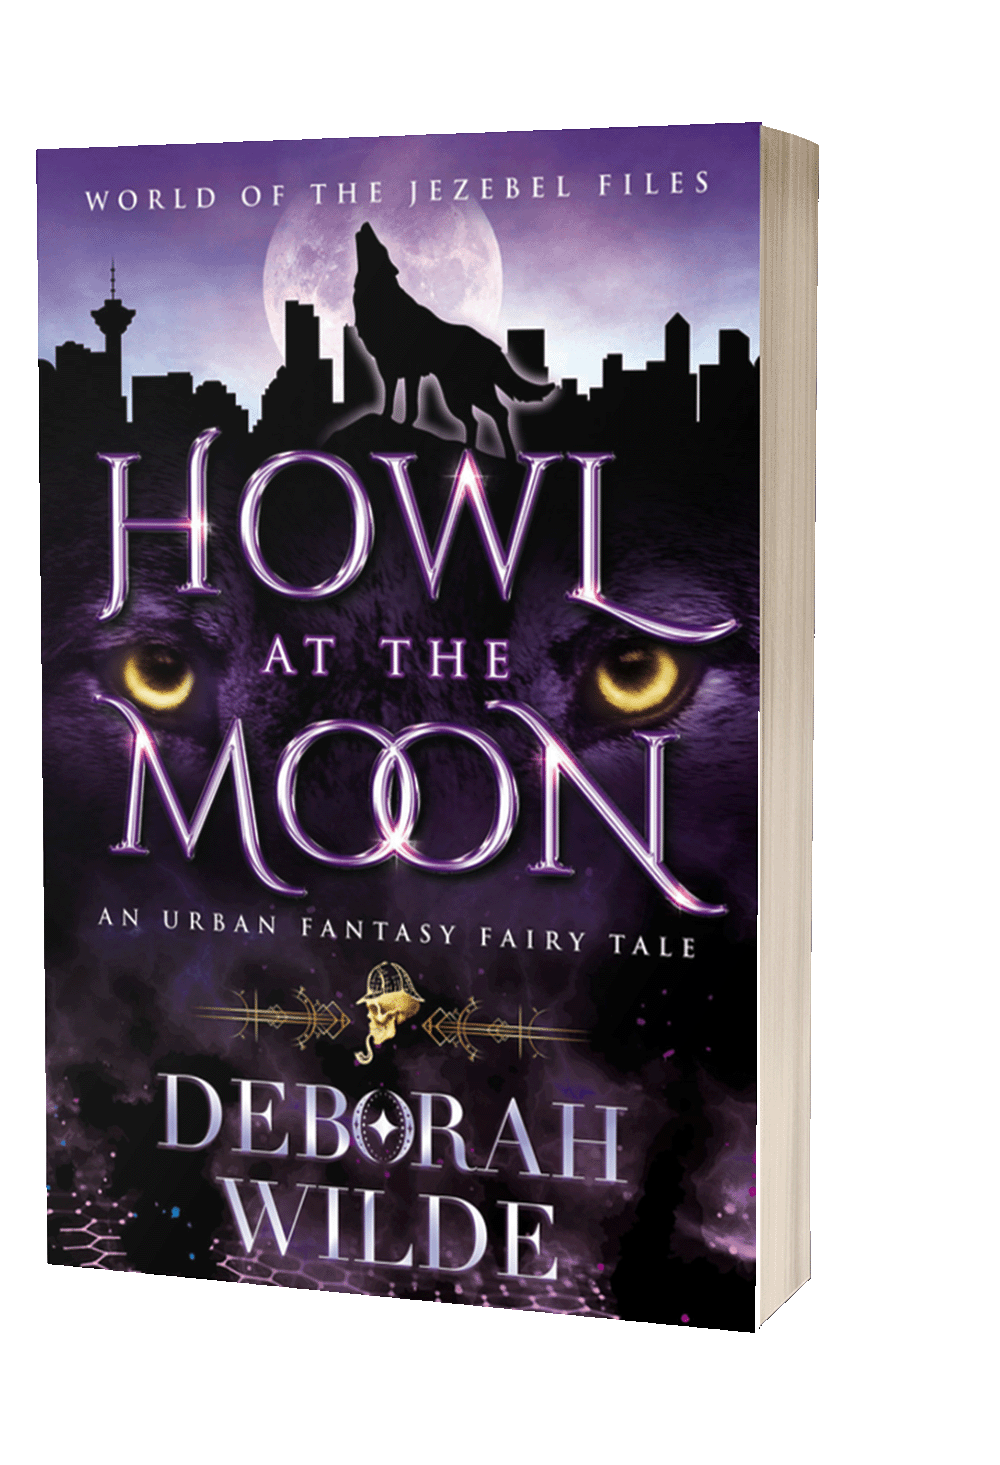 Howl at the Moon, a funny, sexy, urban fantasy fairy tale.